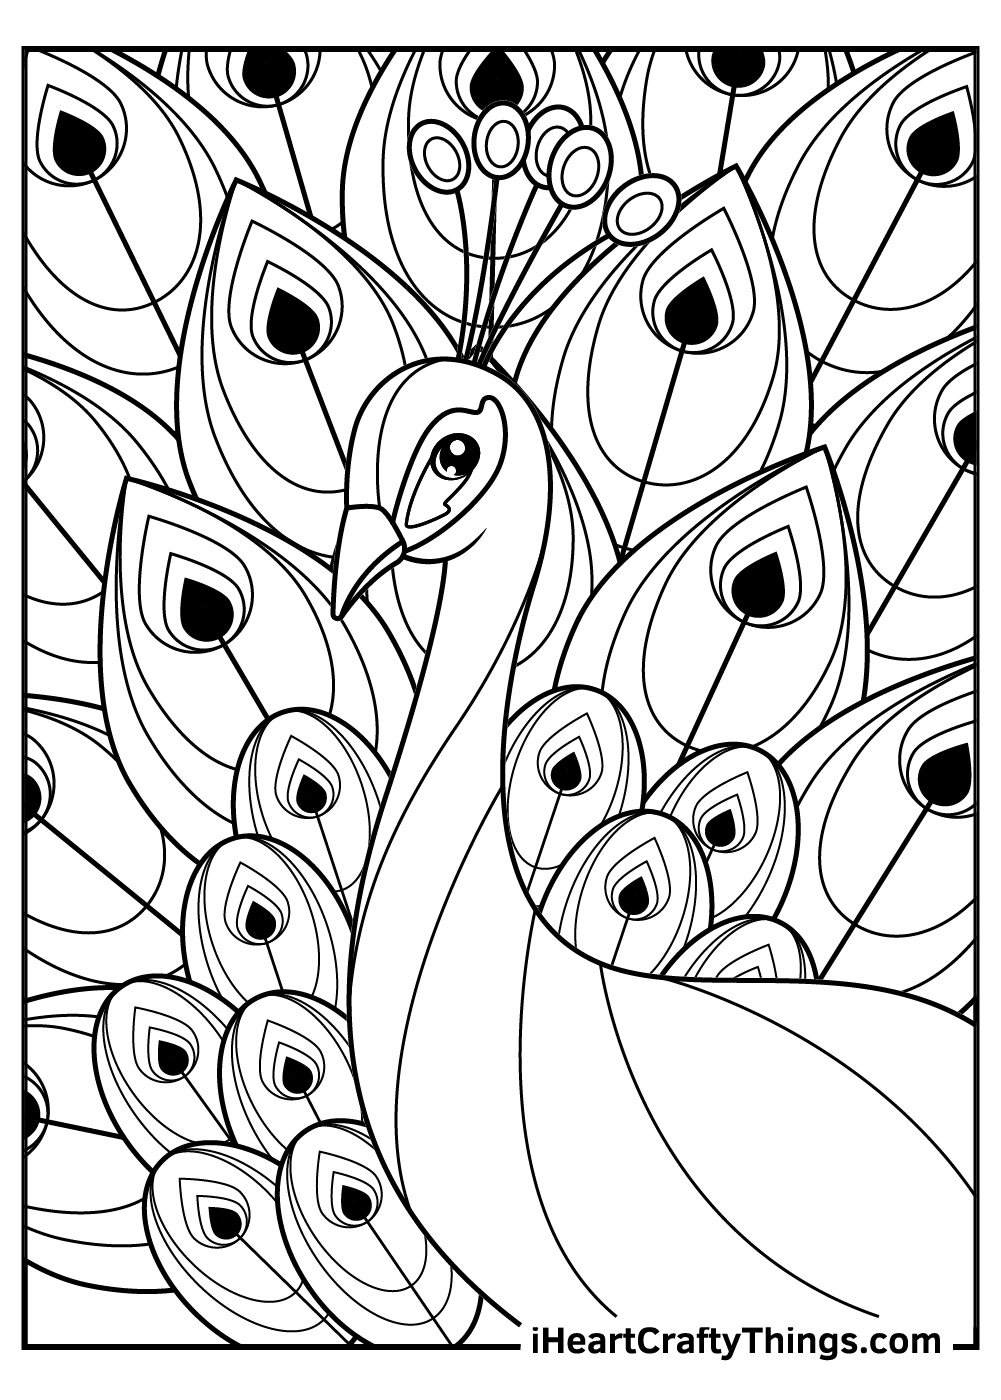 Peacocks coloring pages free printables